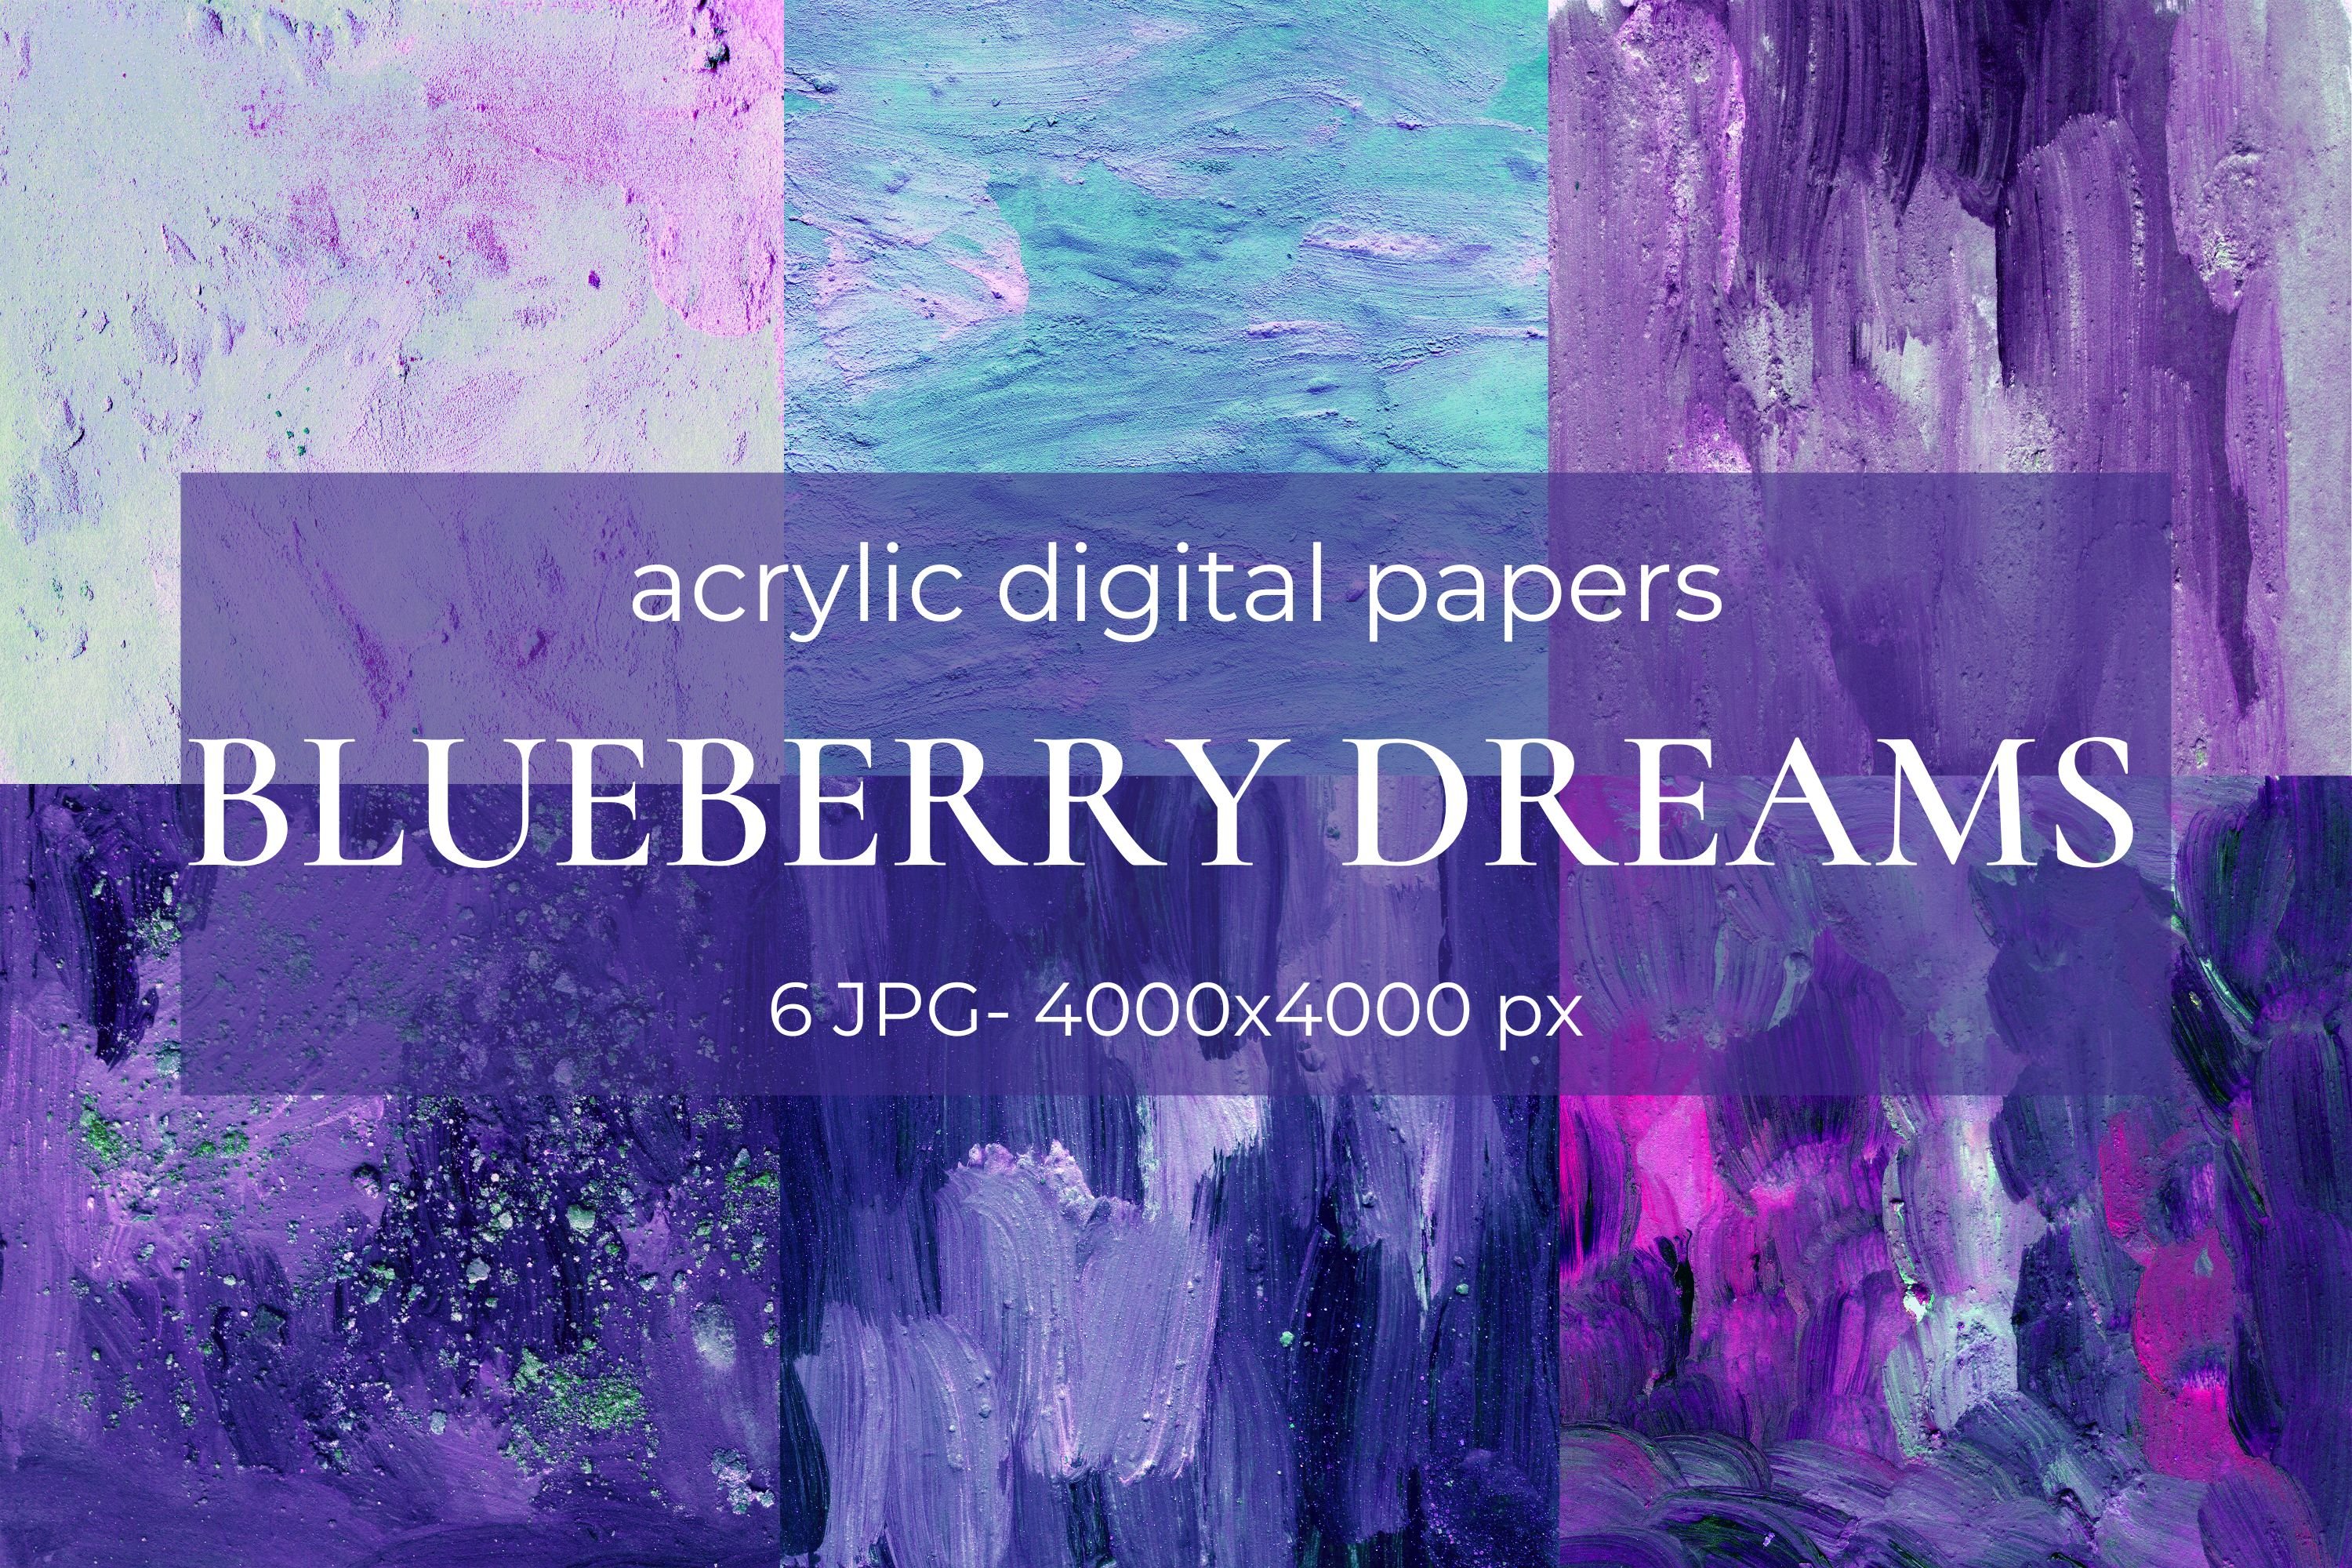 Blueberry - acyclic digital papers cover image.